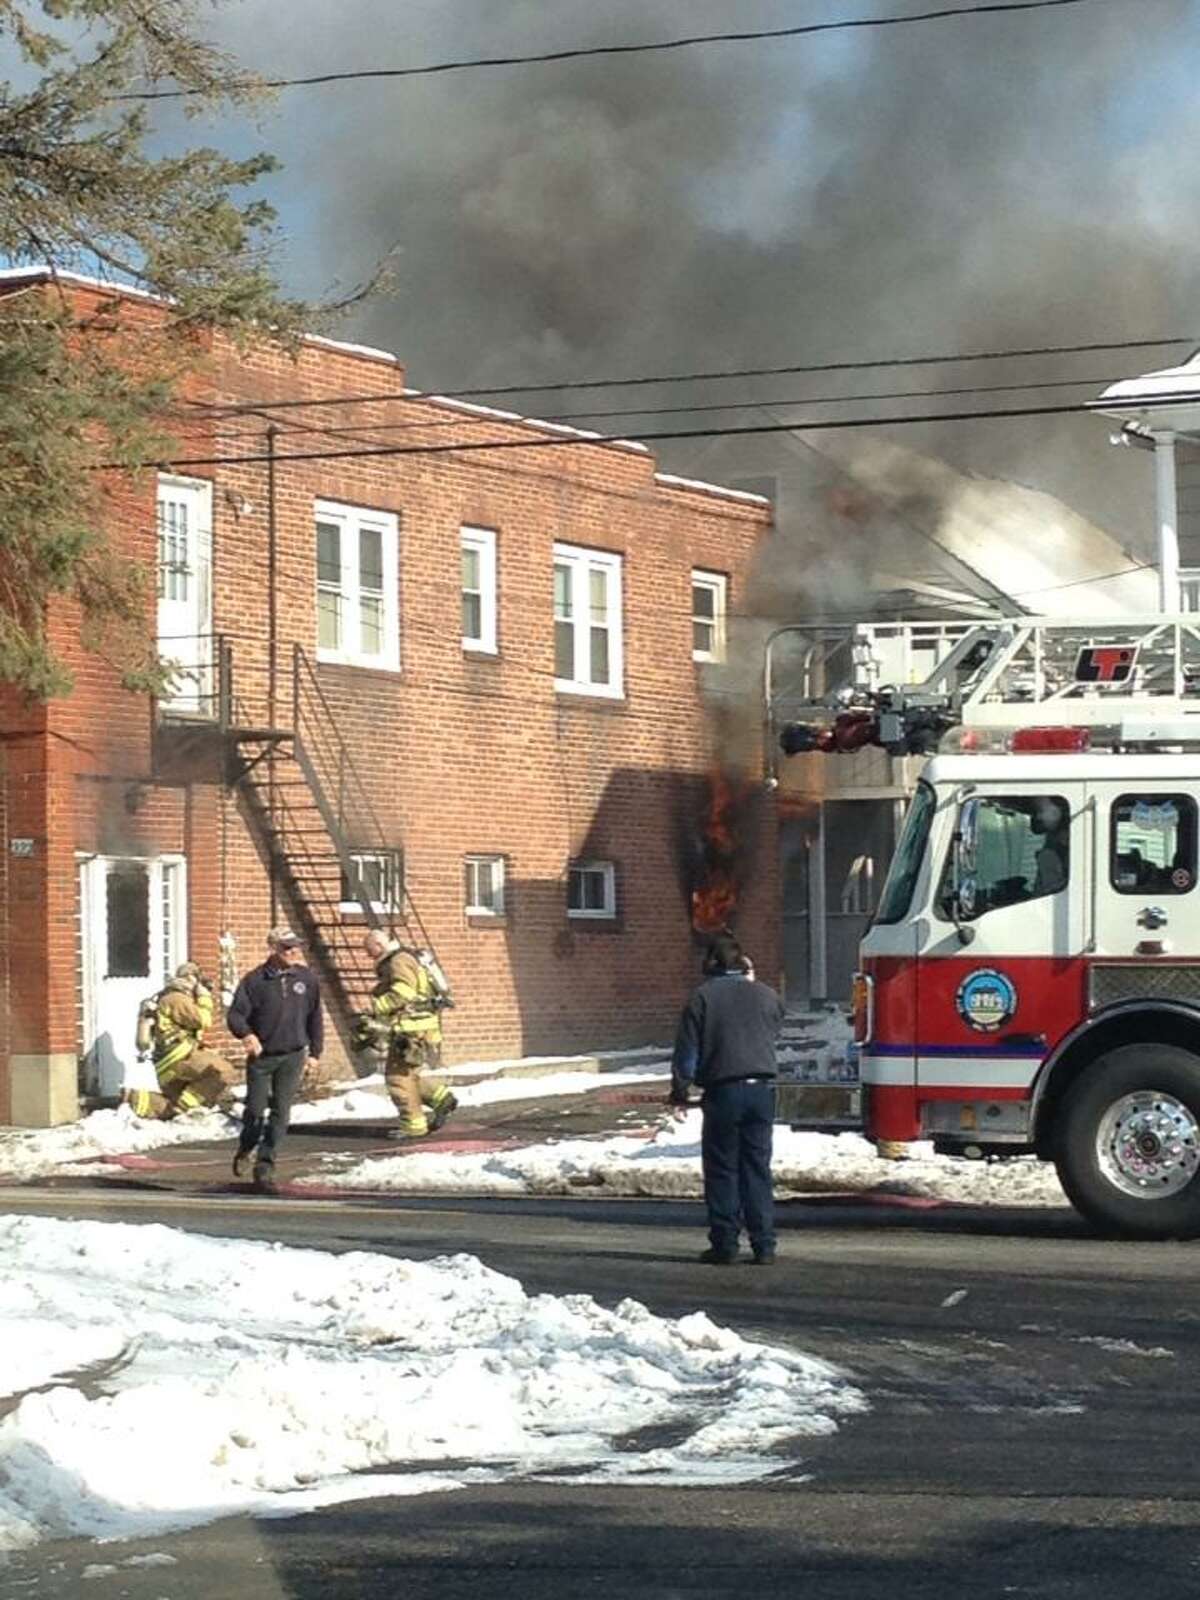 A fire on North Elm Street in Torrington on Wednesday, March 20, 2013 left a family homeless. Photo contributed by Tracy Woodward.